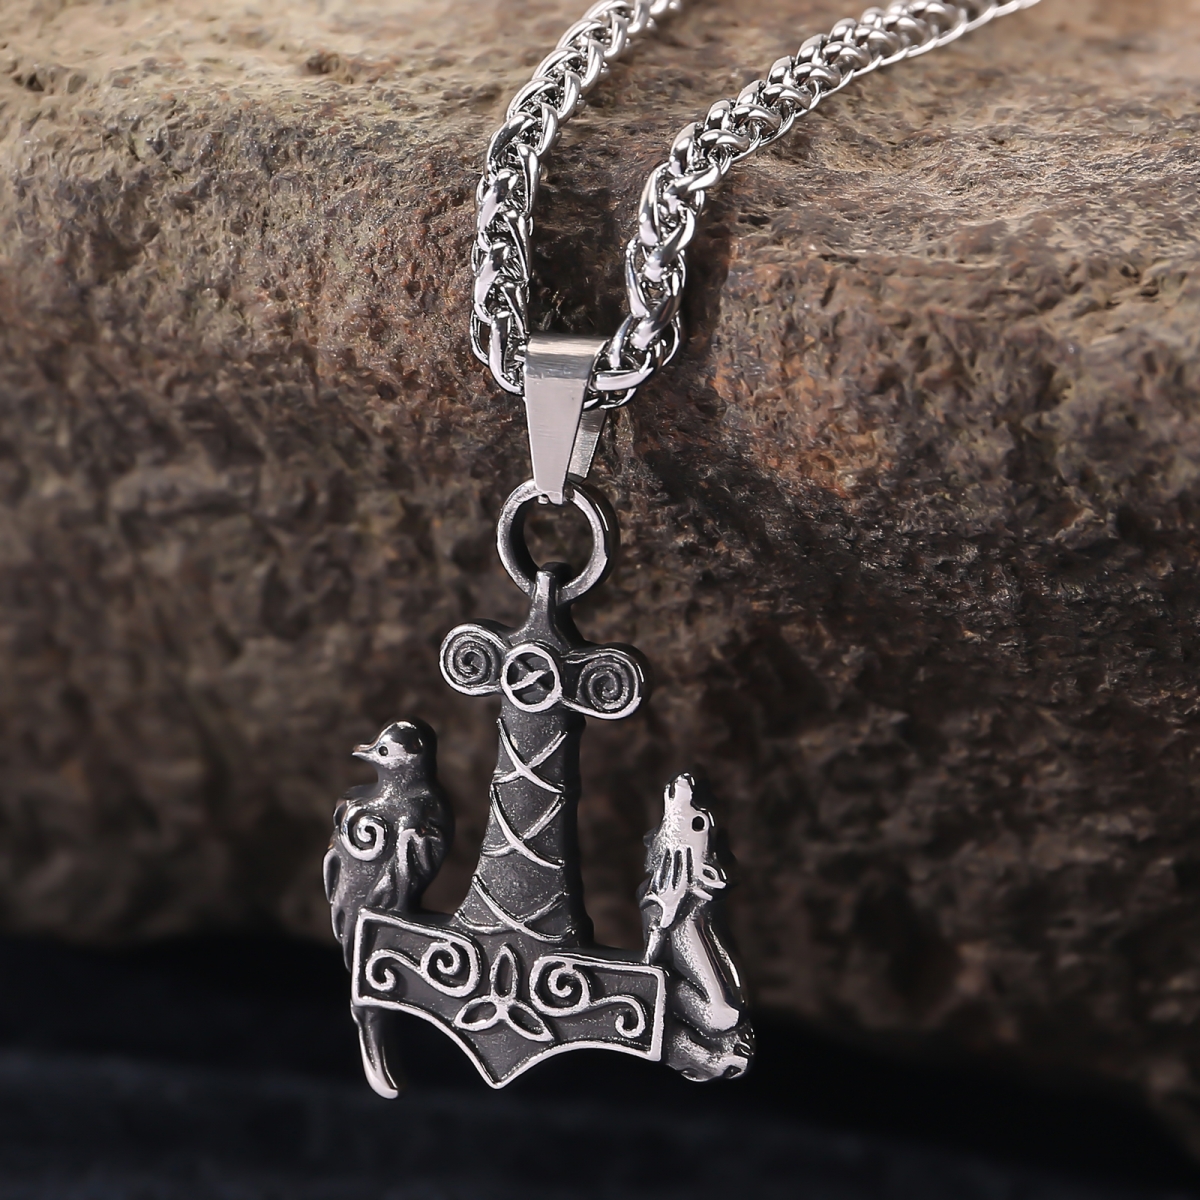 Viking jewelry for USA market-NORSECOLLECTION- Viking Jewelry,Viking Necklace,Viking Bracelet,Viking Rings,Viking Mugs,Viking Accessories,Viking Crafts